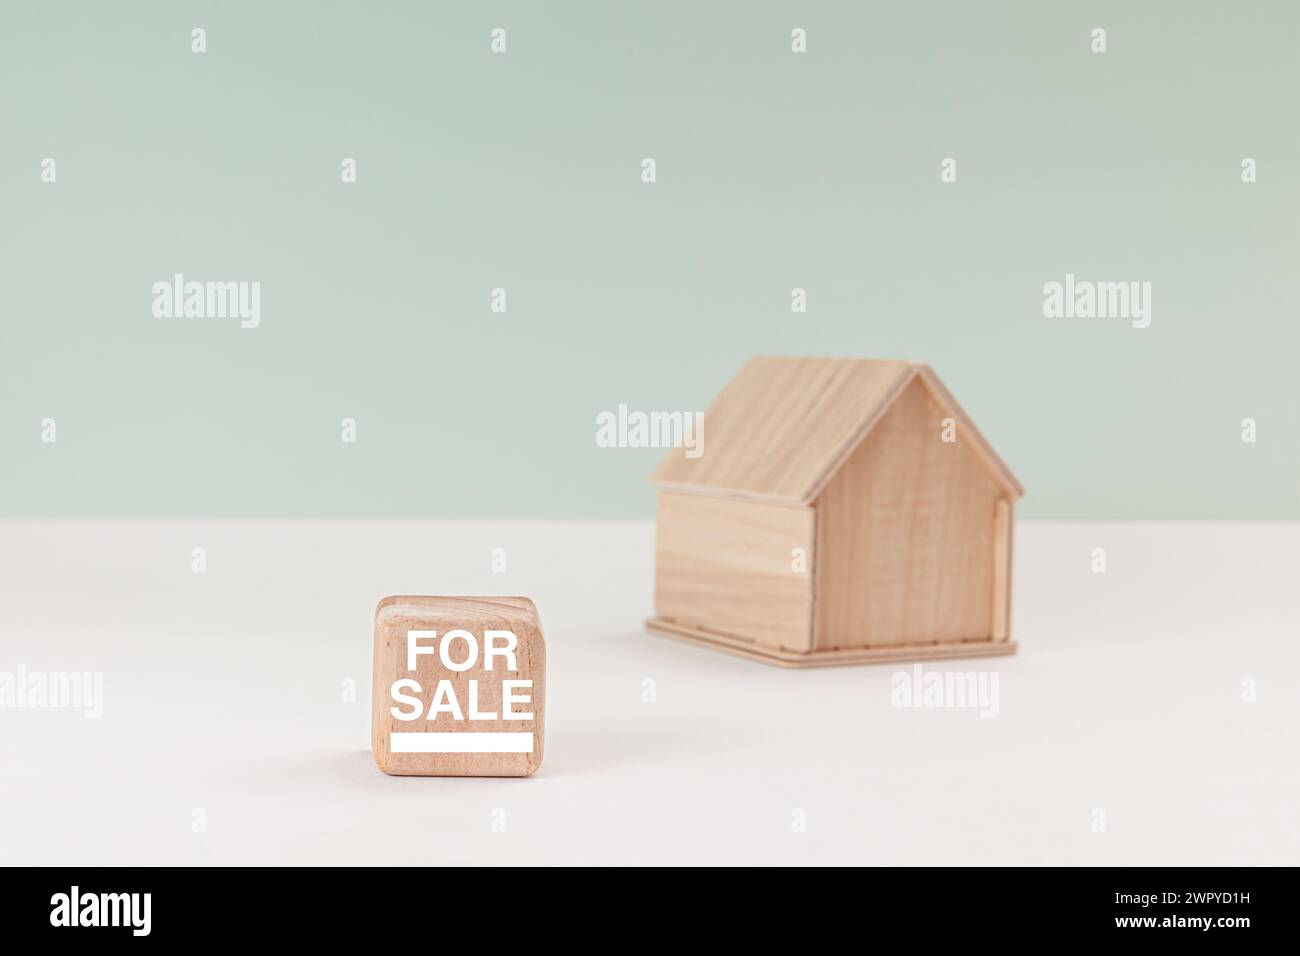 Simplistic wooden house model isolated on pale green background, with text For Sale on signboard. Stock Photo